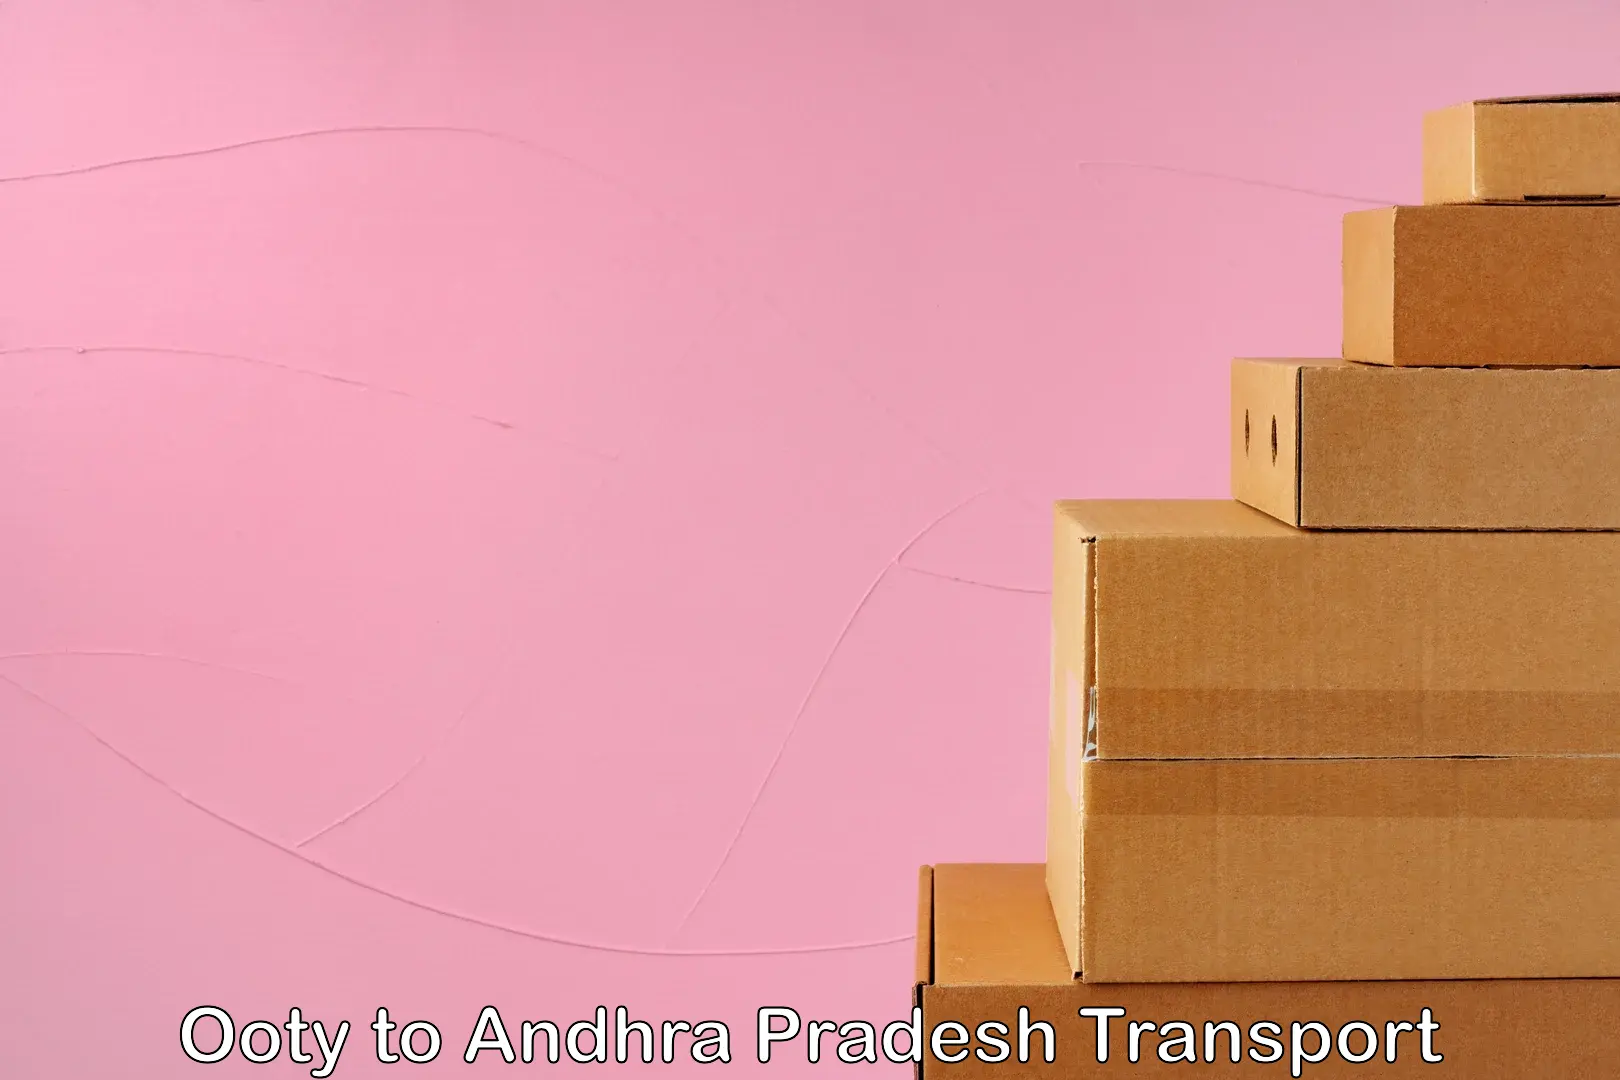 Air freight transport services Ooty to Puttaparthi